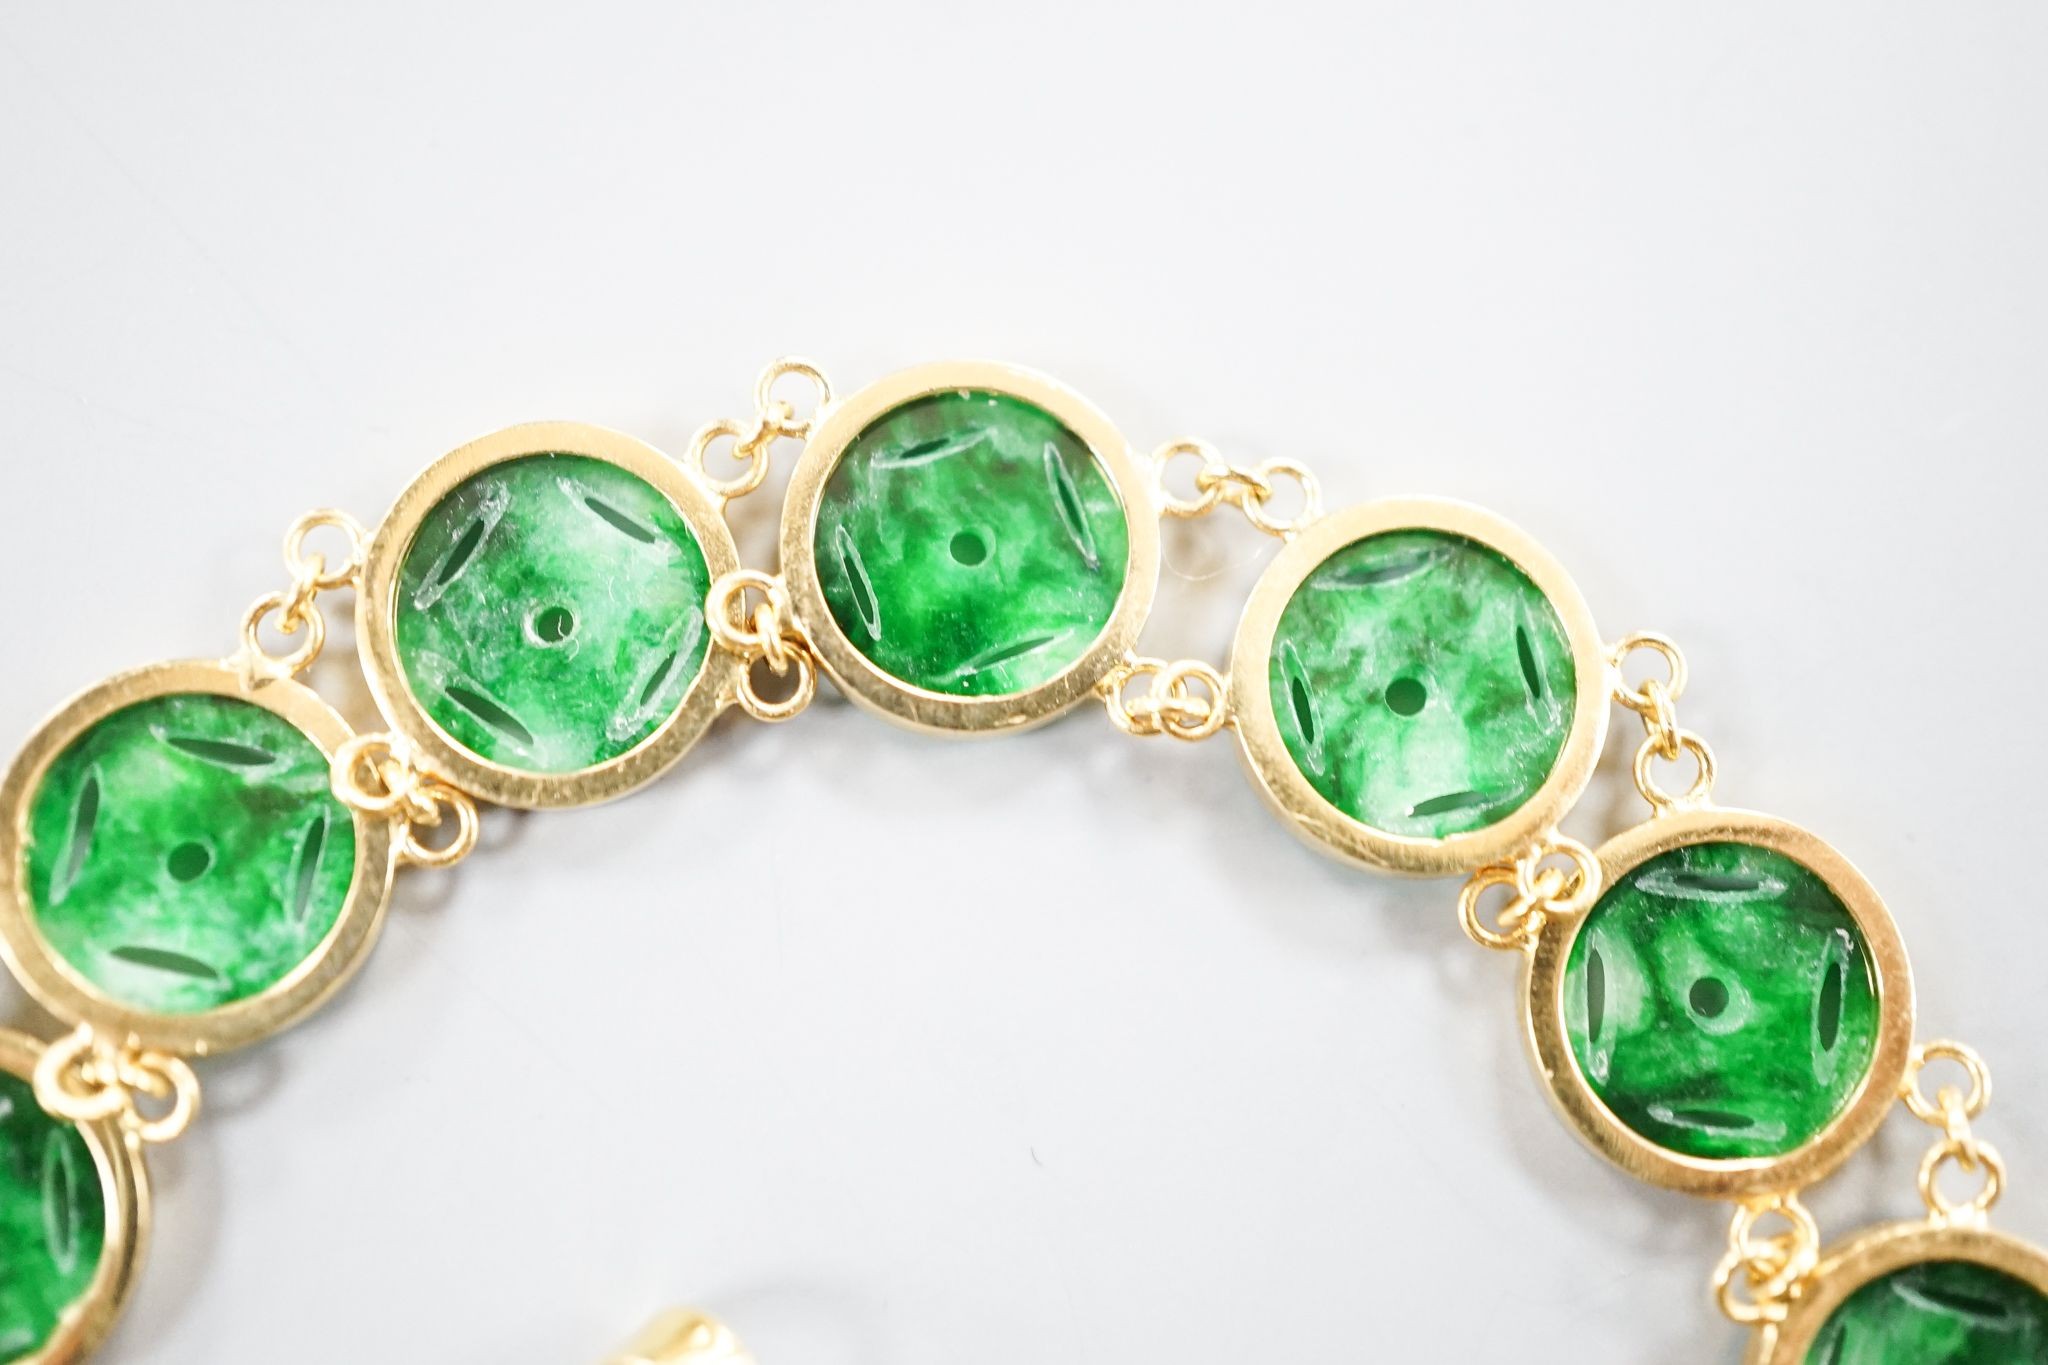 A Chinese 850 yellow metal and jade disc bracelet, 15cm and a matching small pendant, gross 9.7 grams.